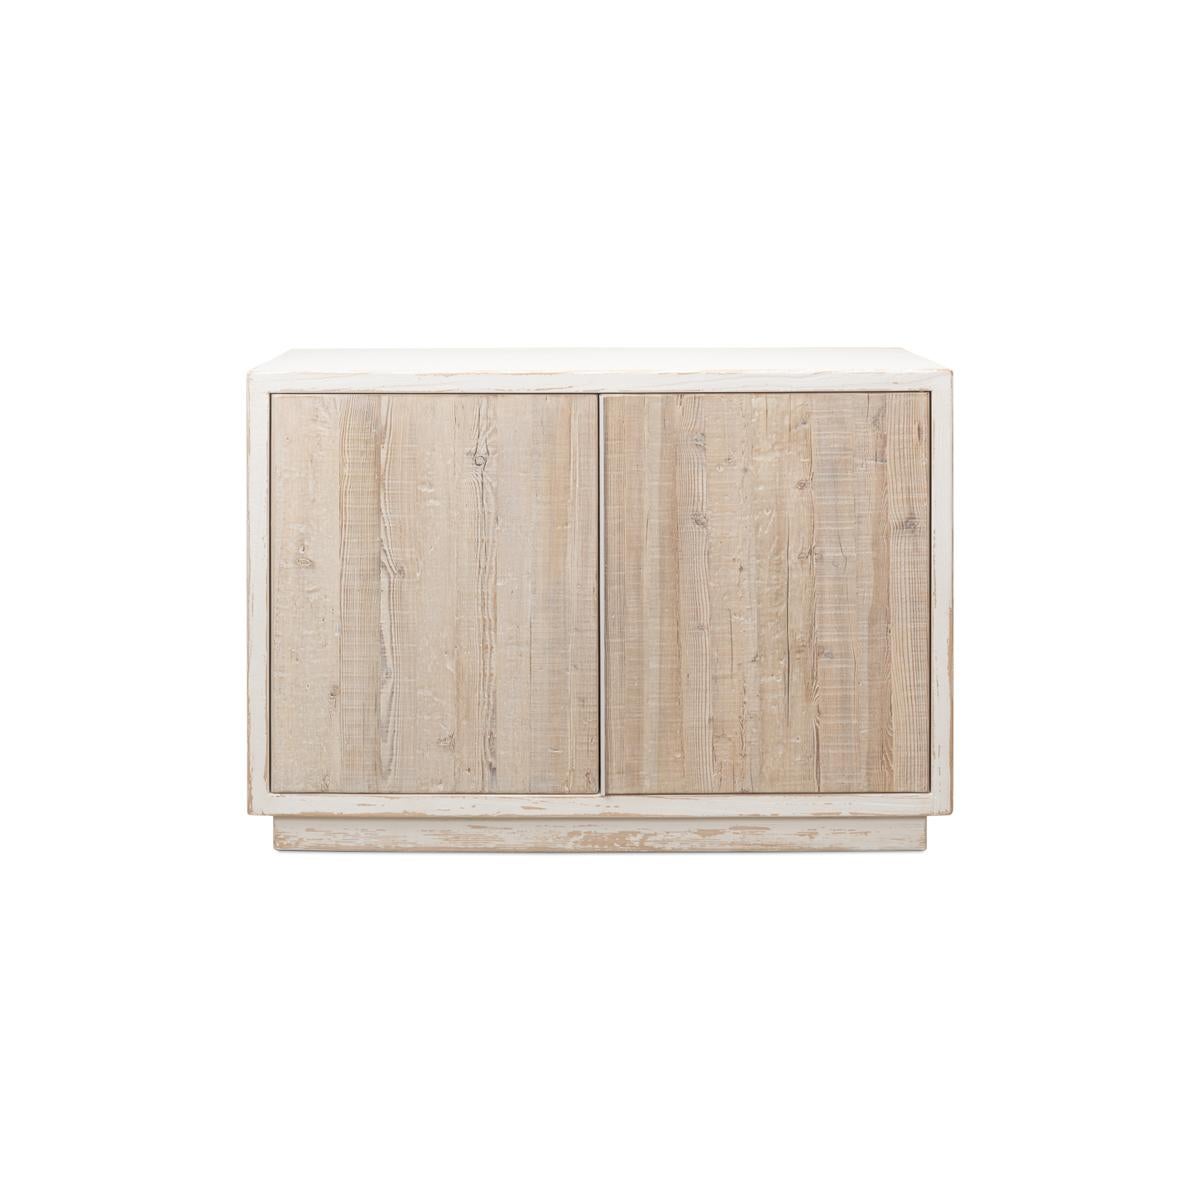 The antiqued white pine wood, paired with weathered finish doors, creates a statement piece. Raised on a square plinth base, this cabinet effortlessly blends tradition with contemporary design.

Dimensions: 50